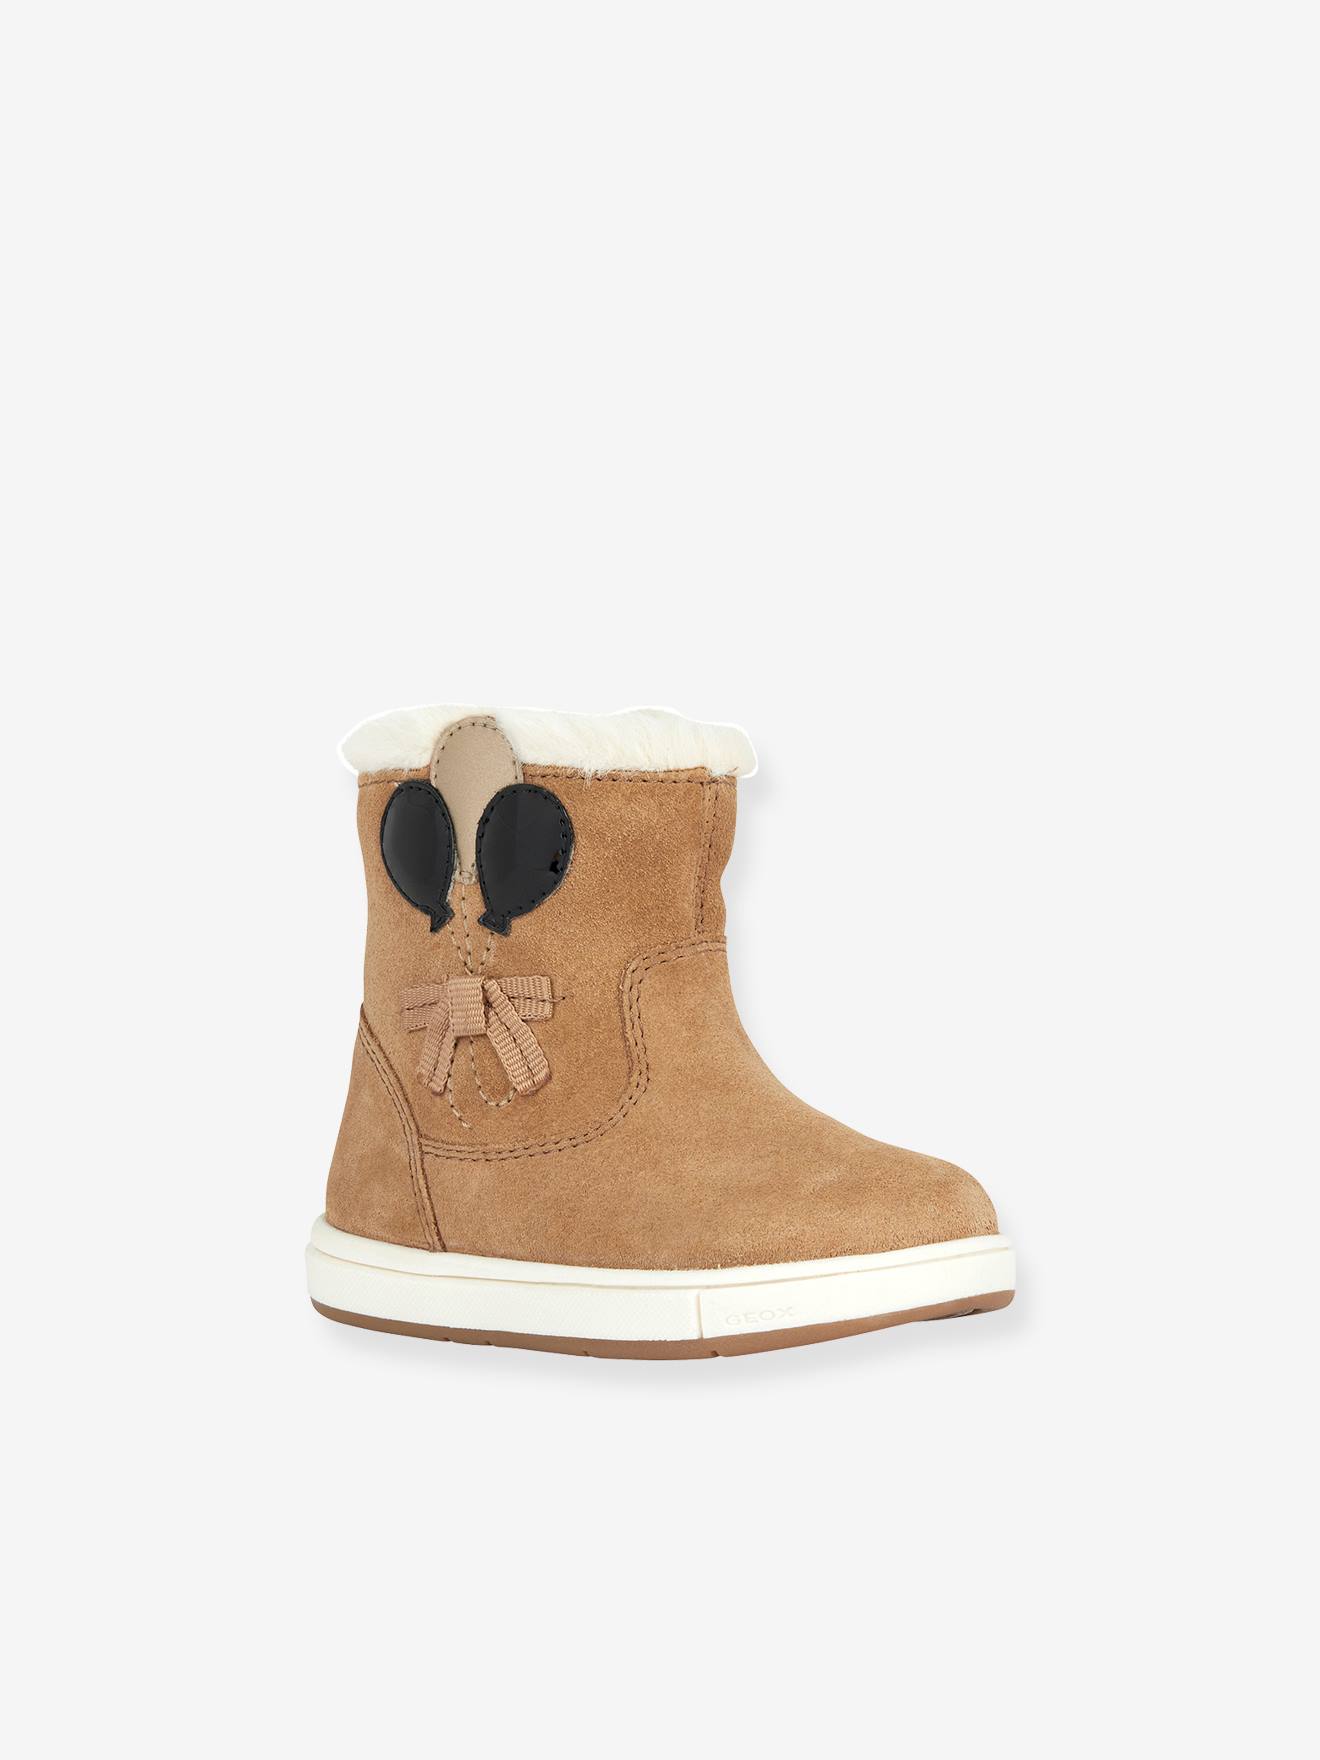 Furry Boots for Babies, B Trottola Girl by GEOX(r) camel